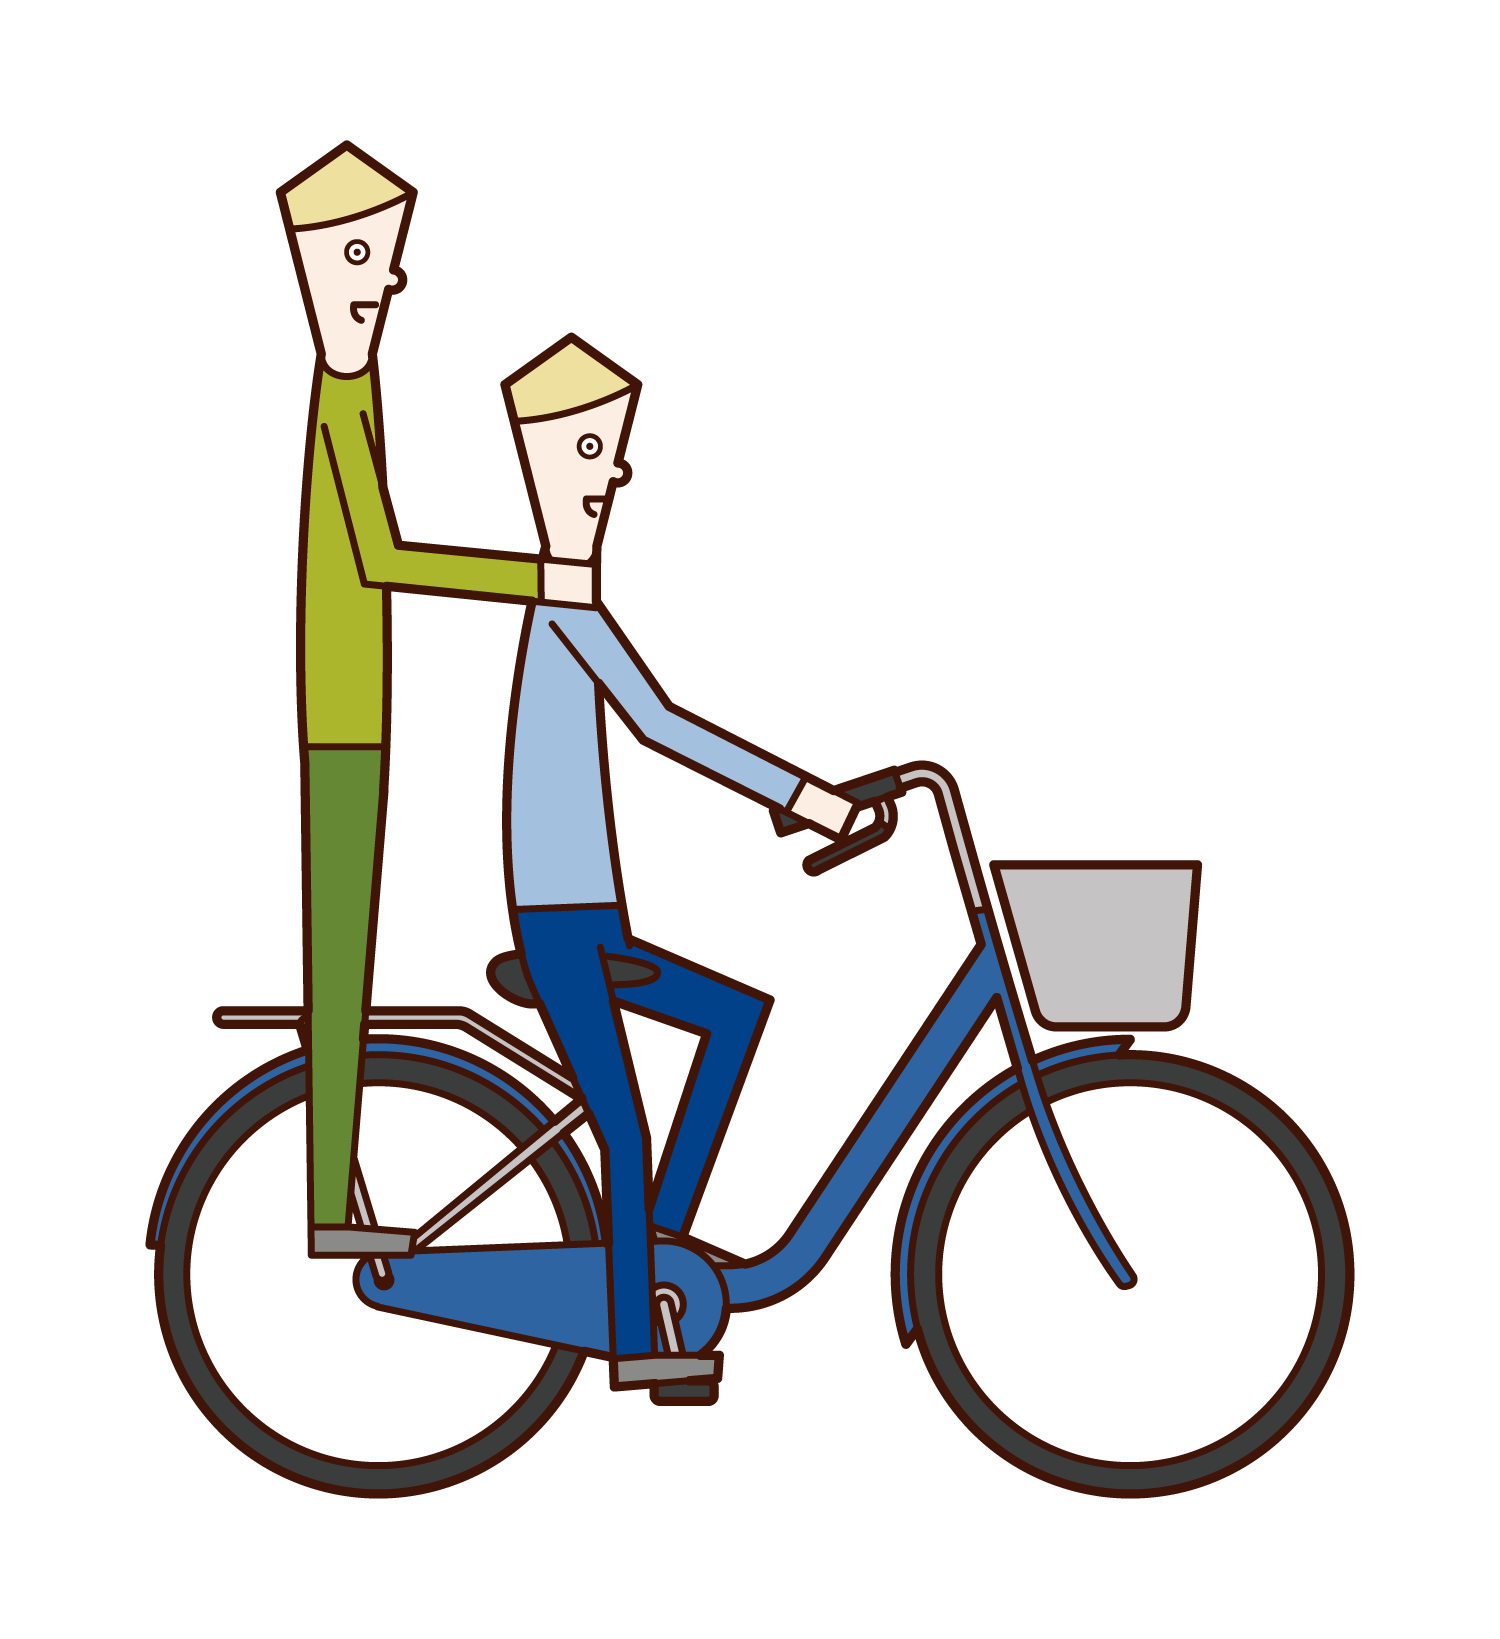 Illustration of a man riding a two-seater on a bicycle